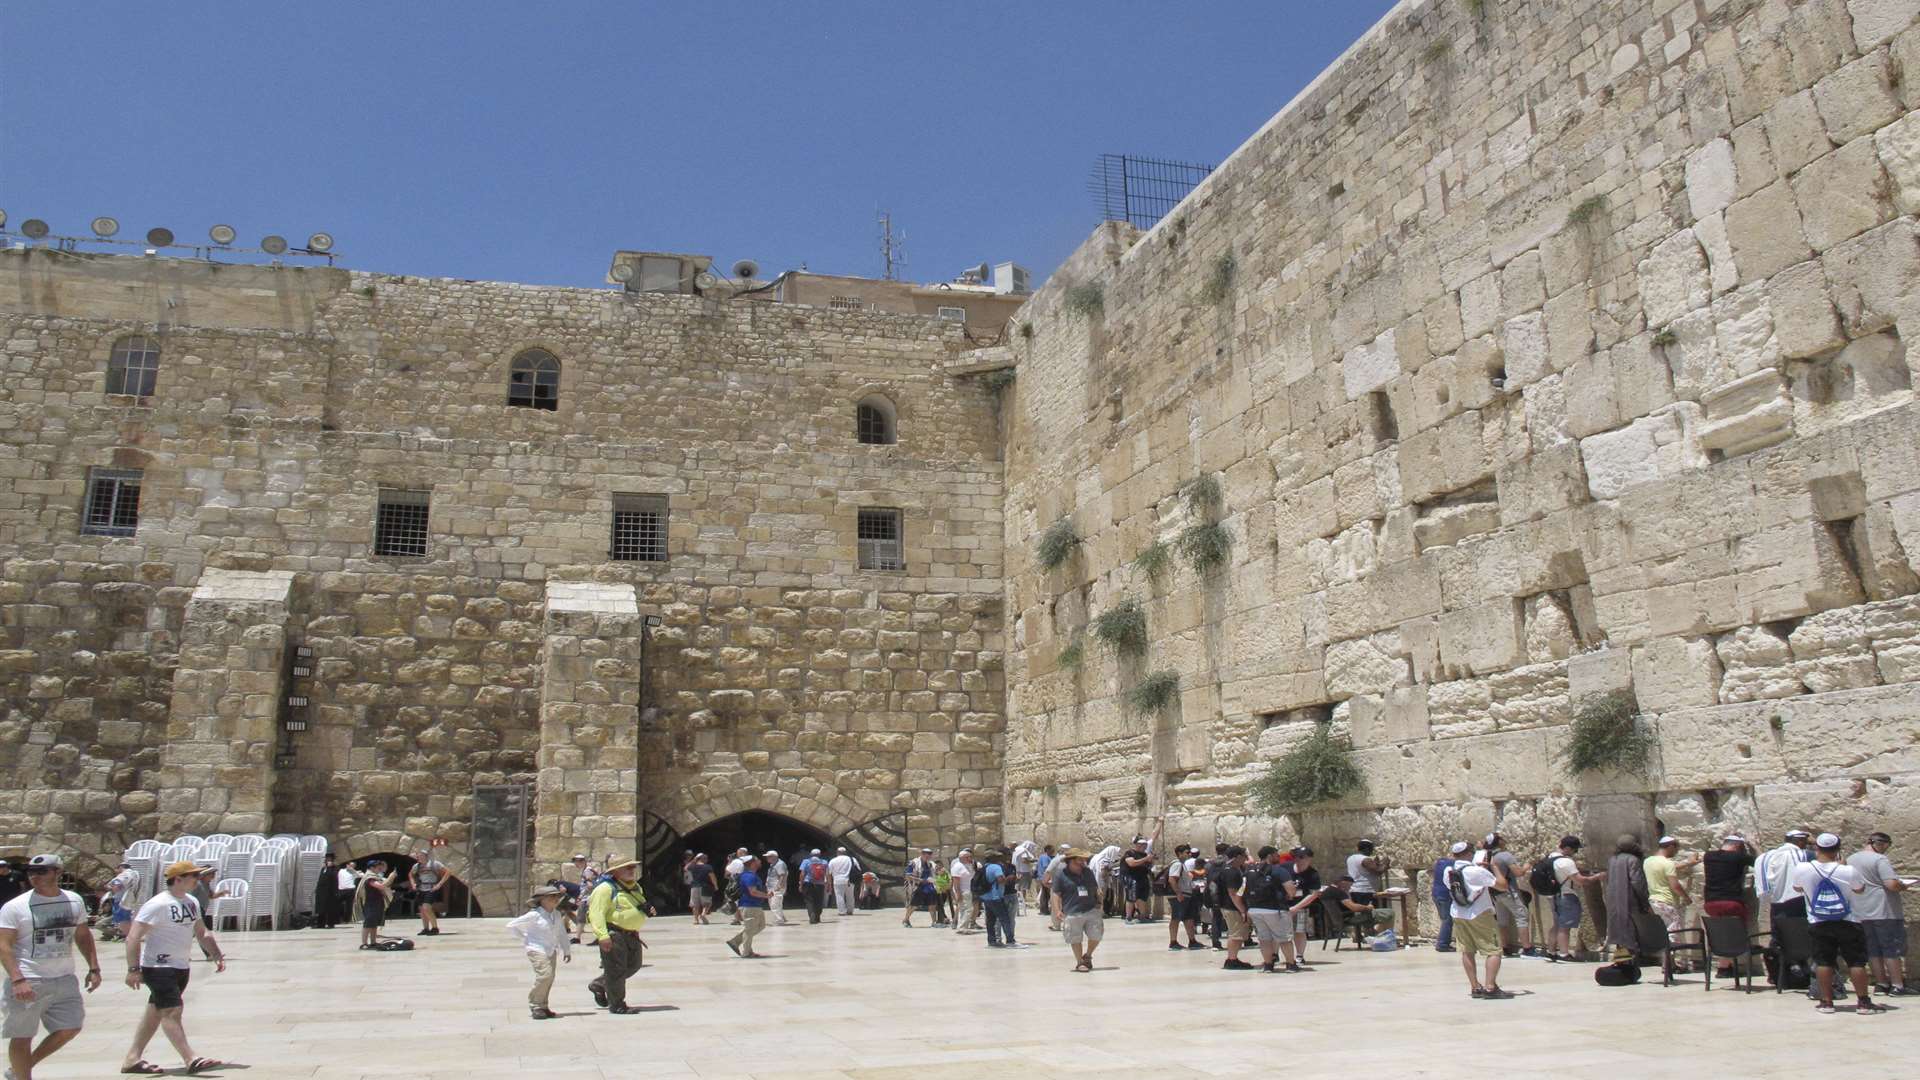 The men's side of the Western Wall